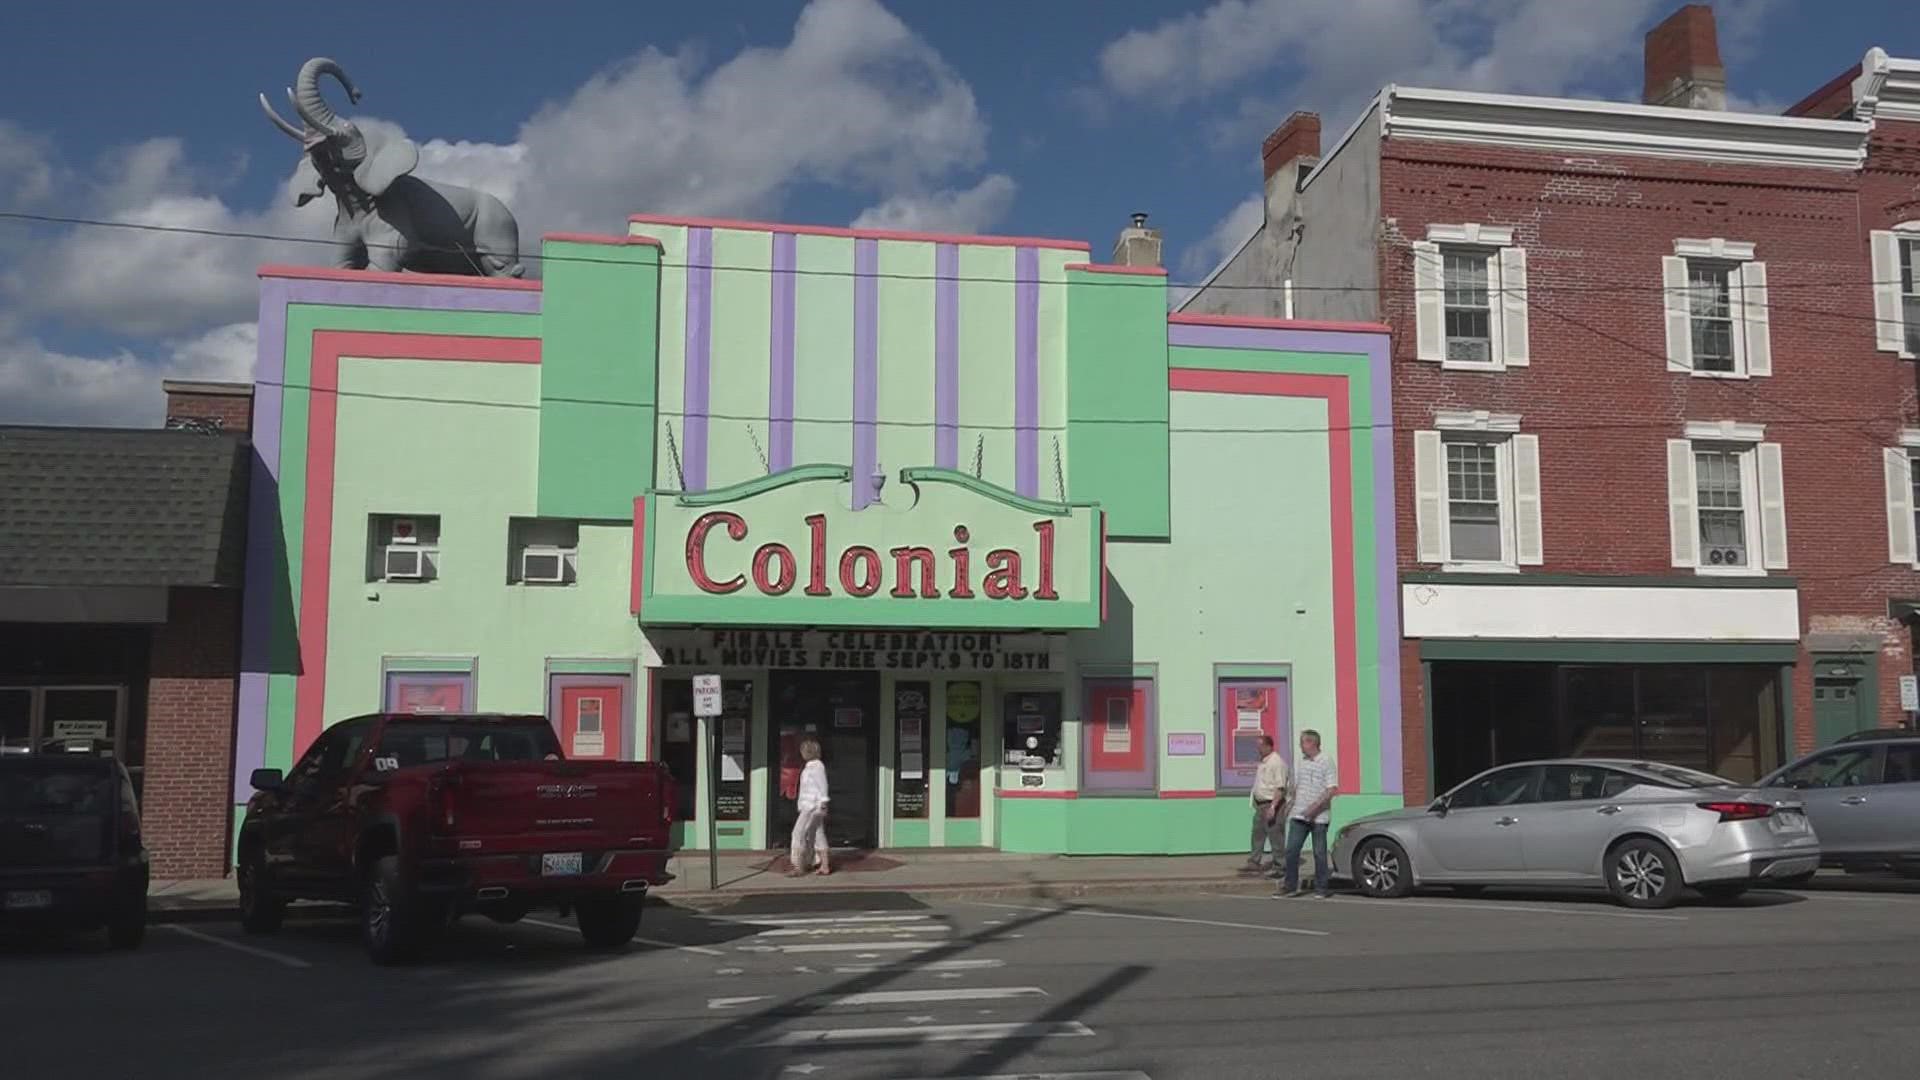 The Colonial Theatre opened in April 1912, the year the Titanic set sail.